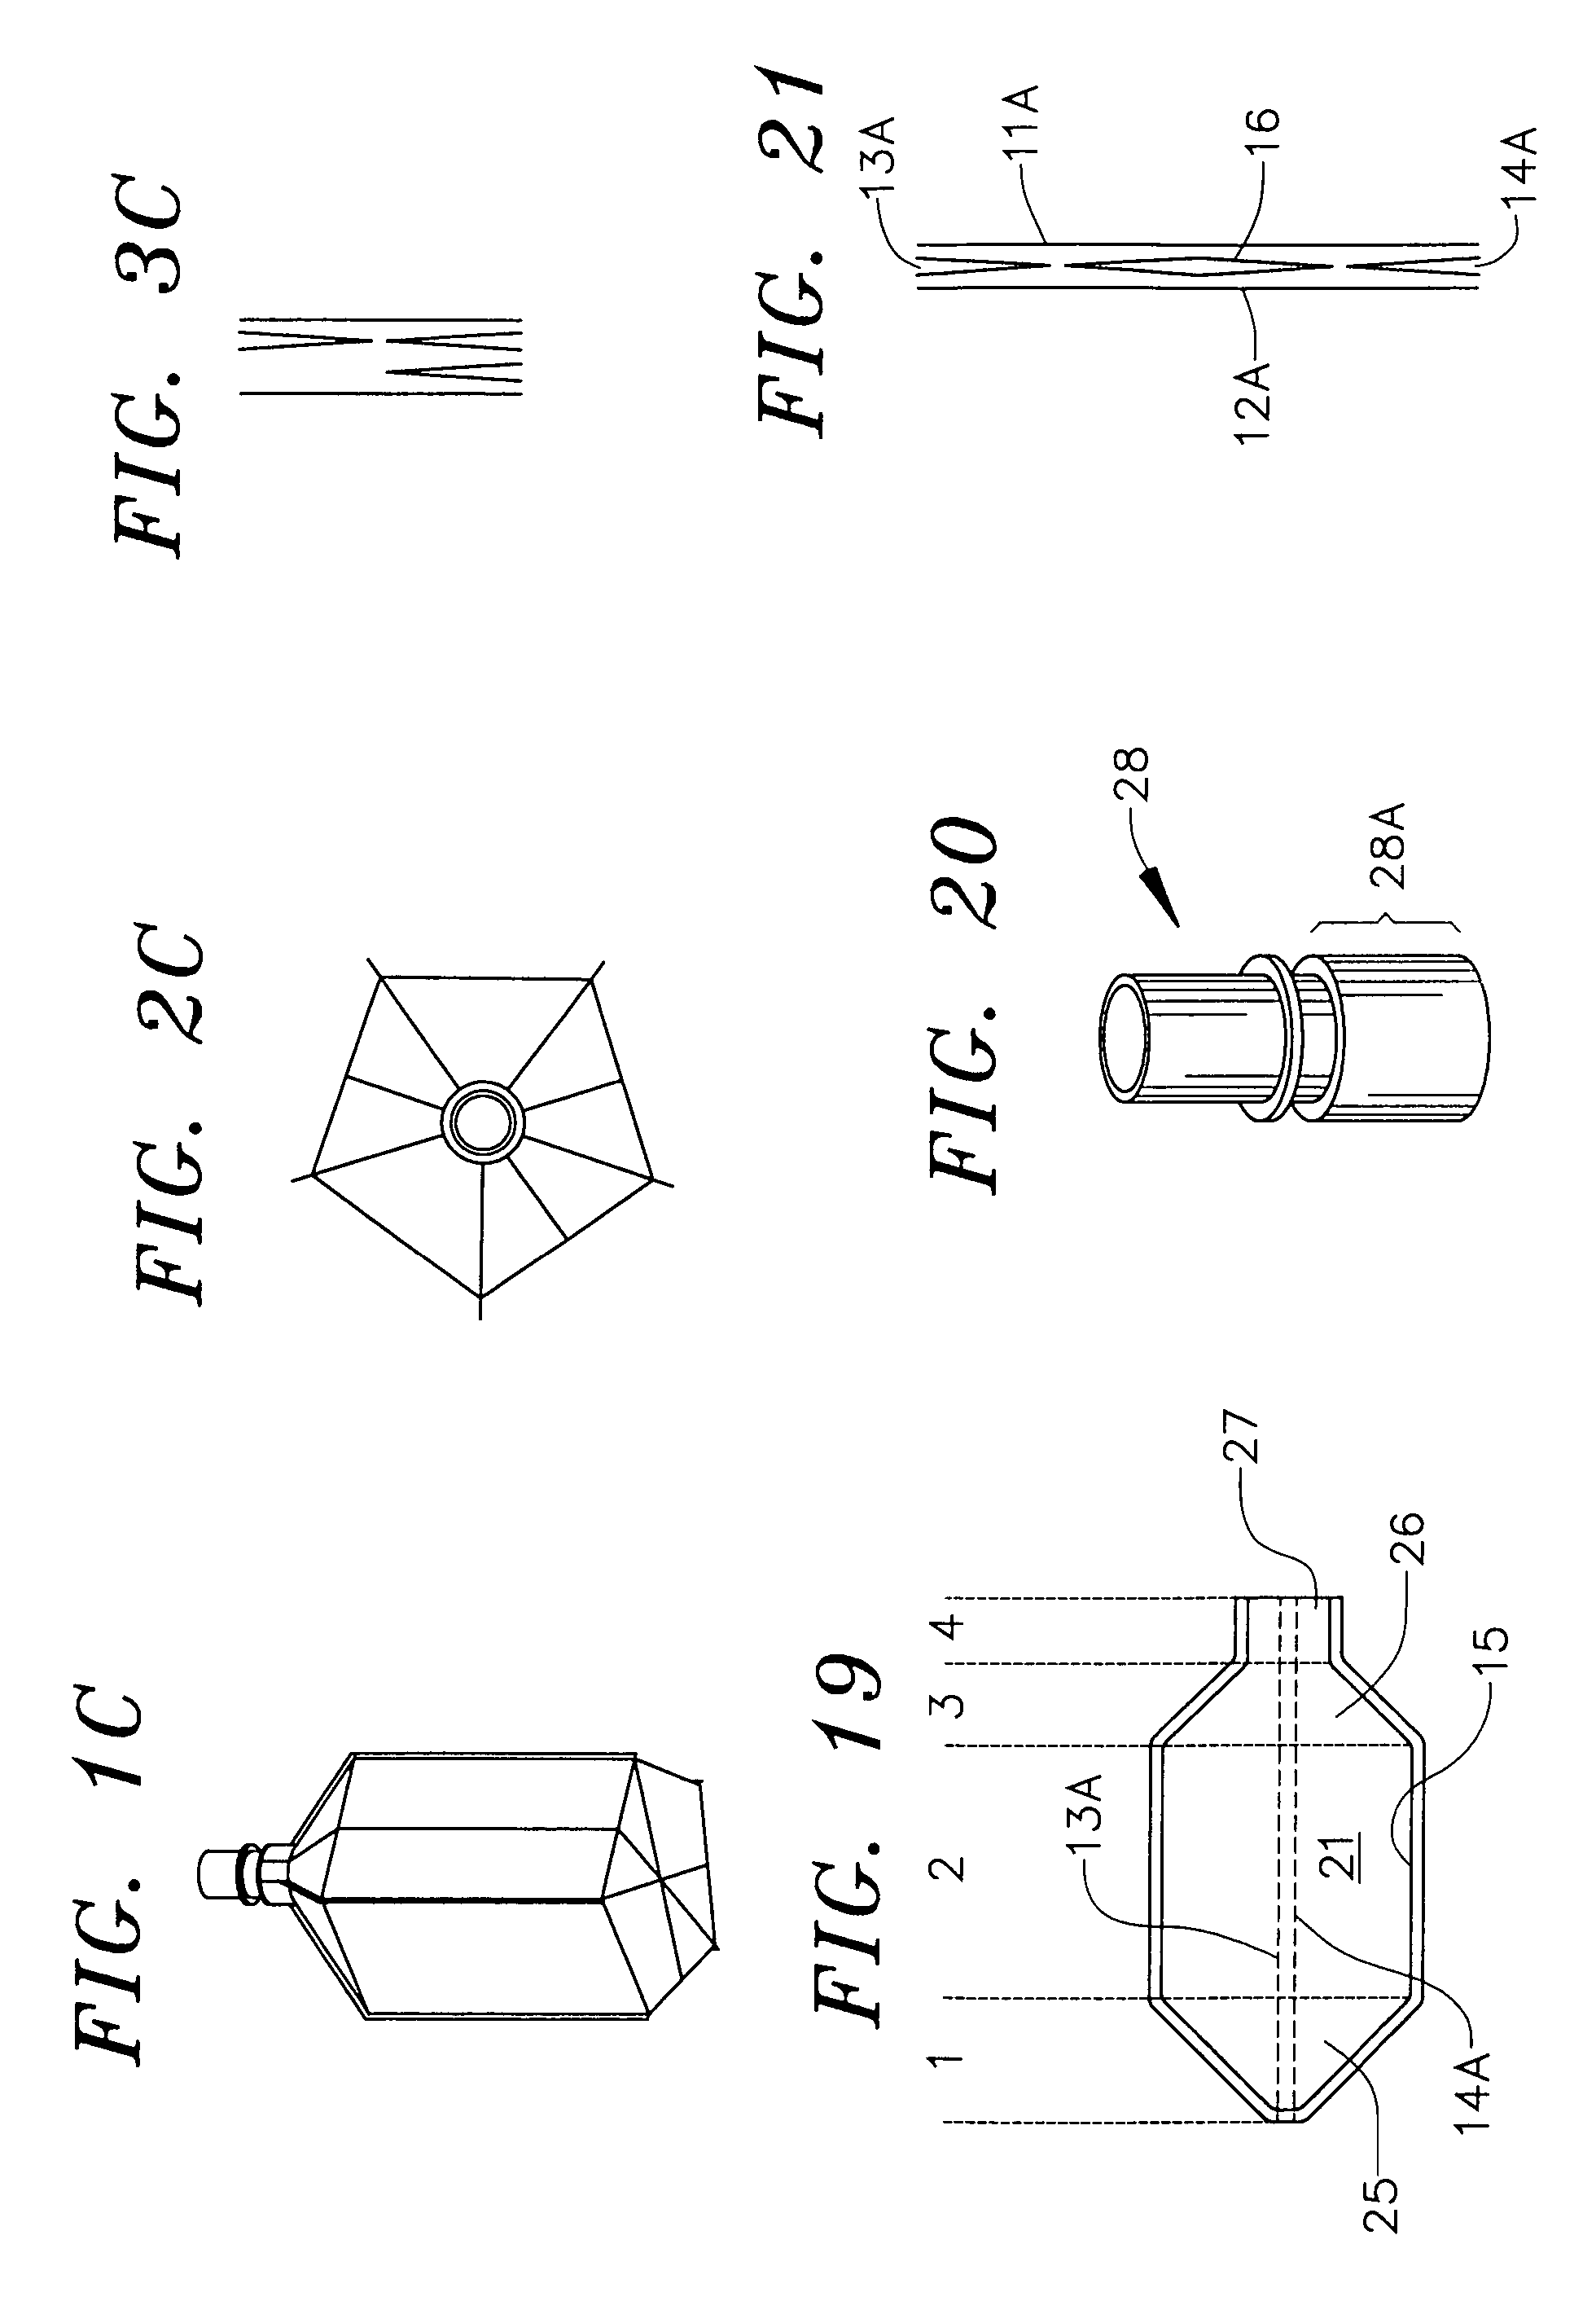 Method of fabrication of gusseted flexible bottle with fitment